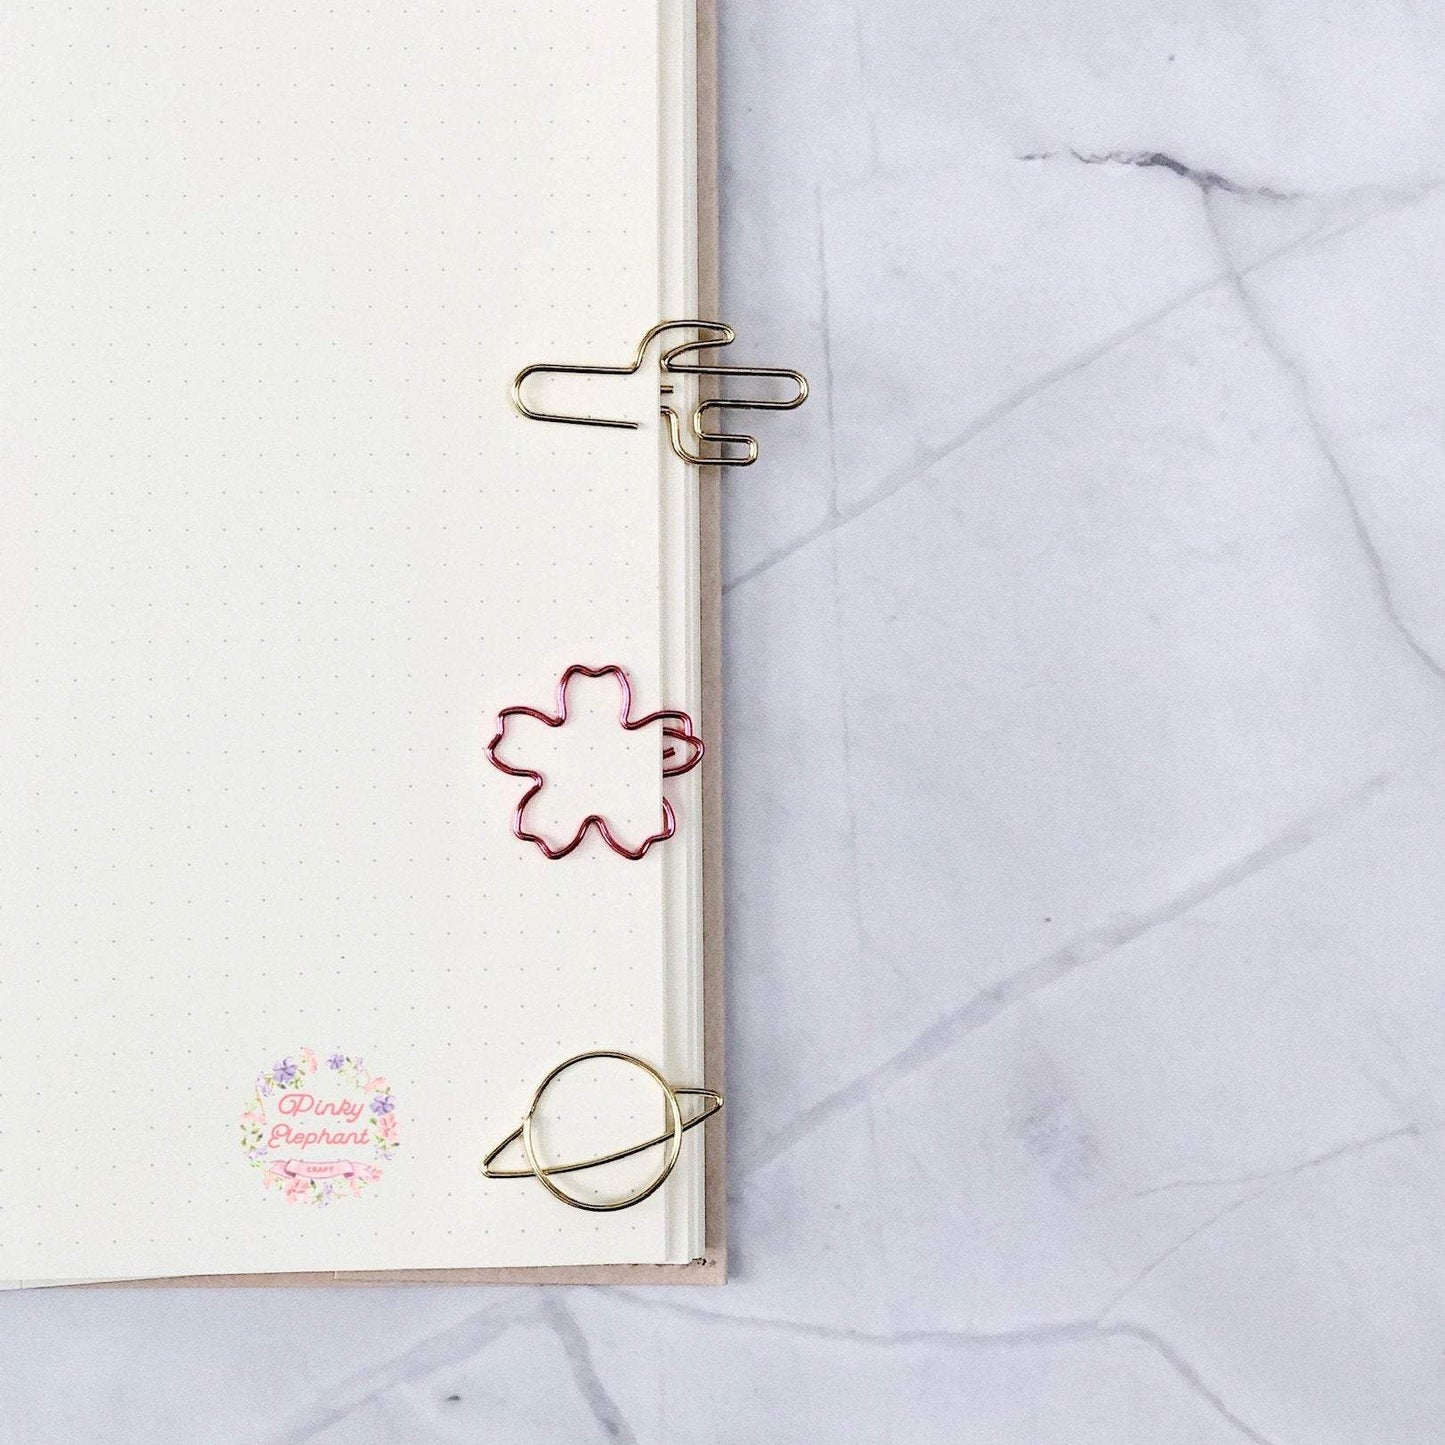 three clips clamping on a dotted notebook page, from the top to bottom, cactus-shaped, pink sakura-shaped and a gold planet-shaped, in a white marble background.